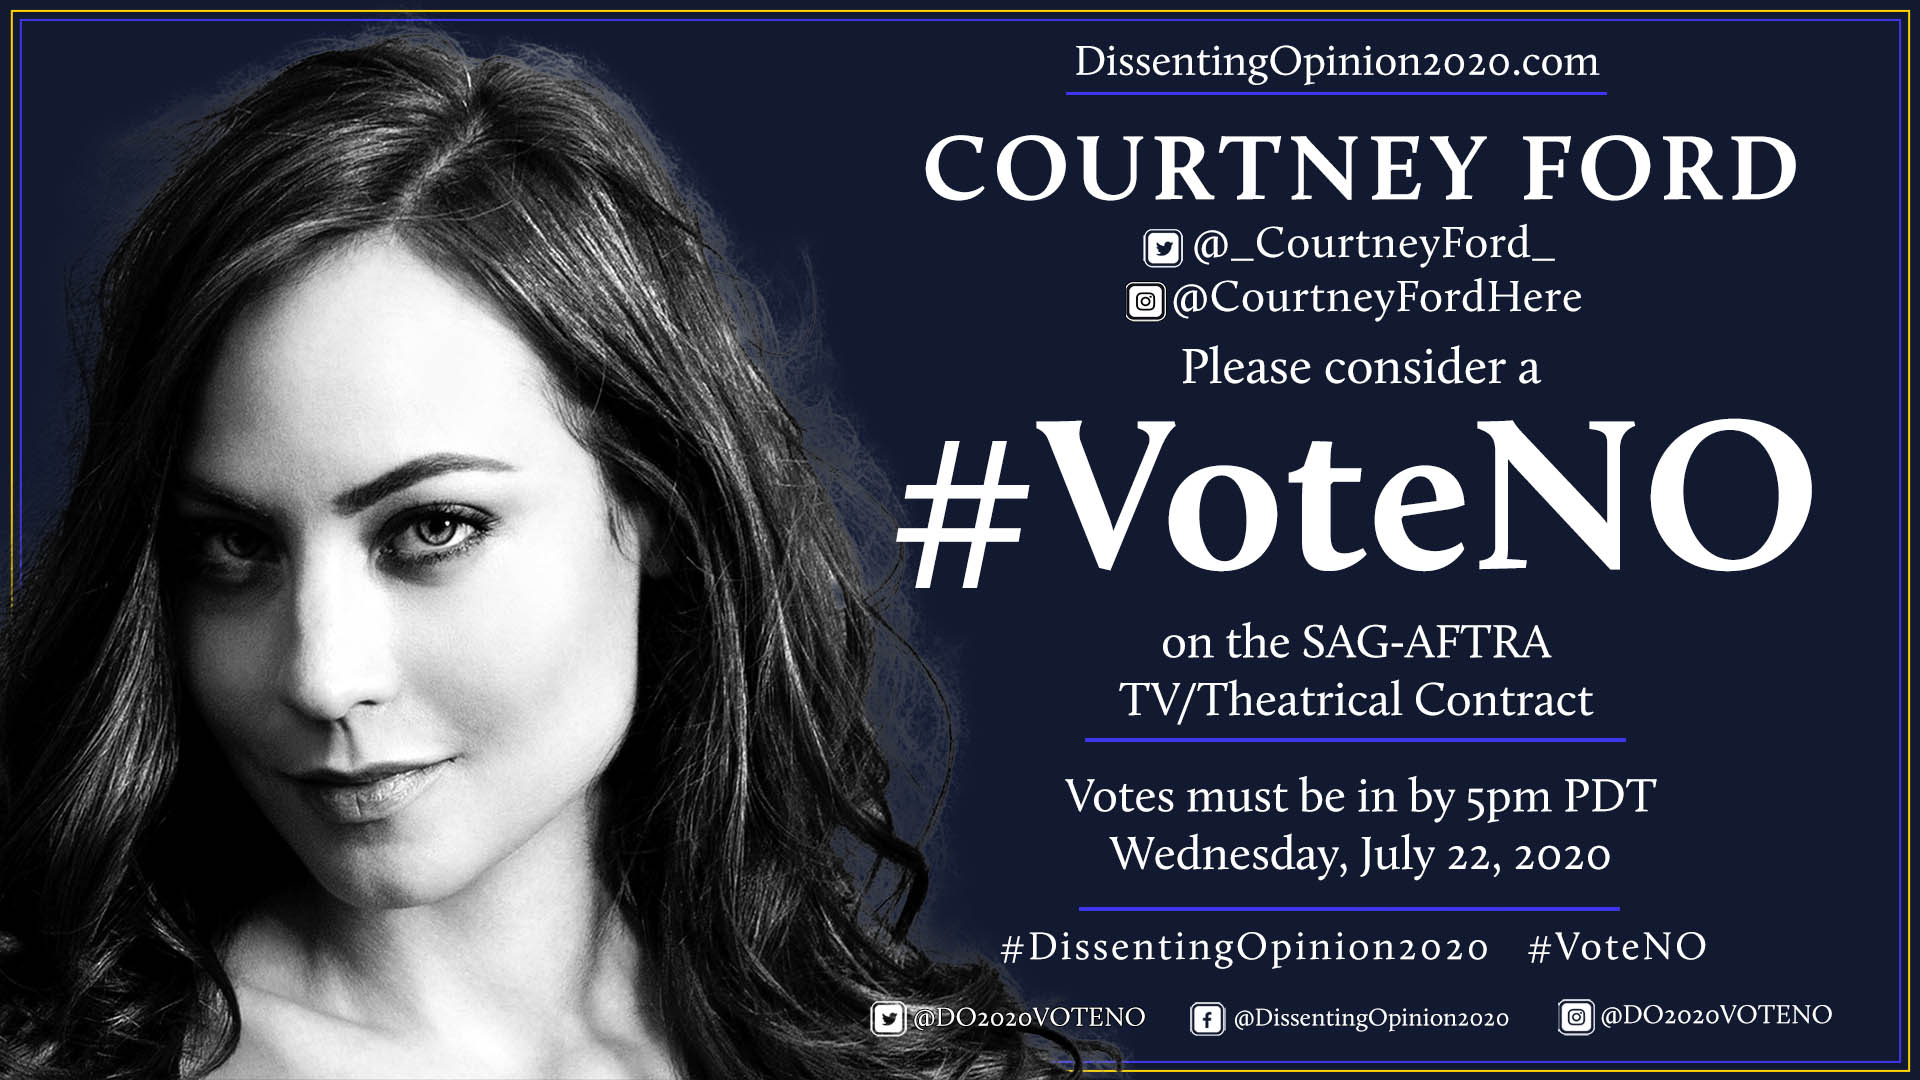 Courtney ford on canaryatlaw dovoteno please do go to my ig stories for more infovideos a link to vote online our canadian brothers amp sisters fought amp won a better